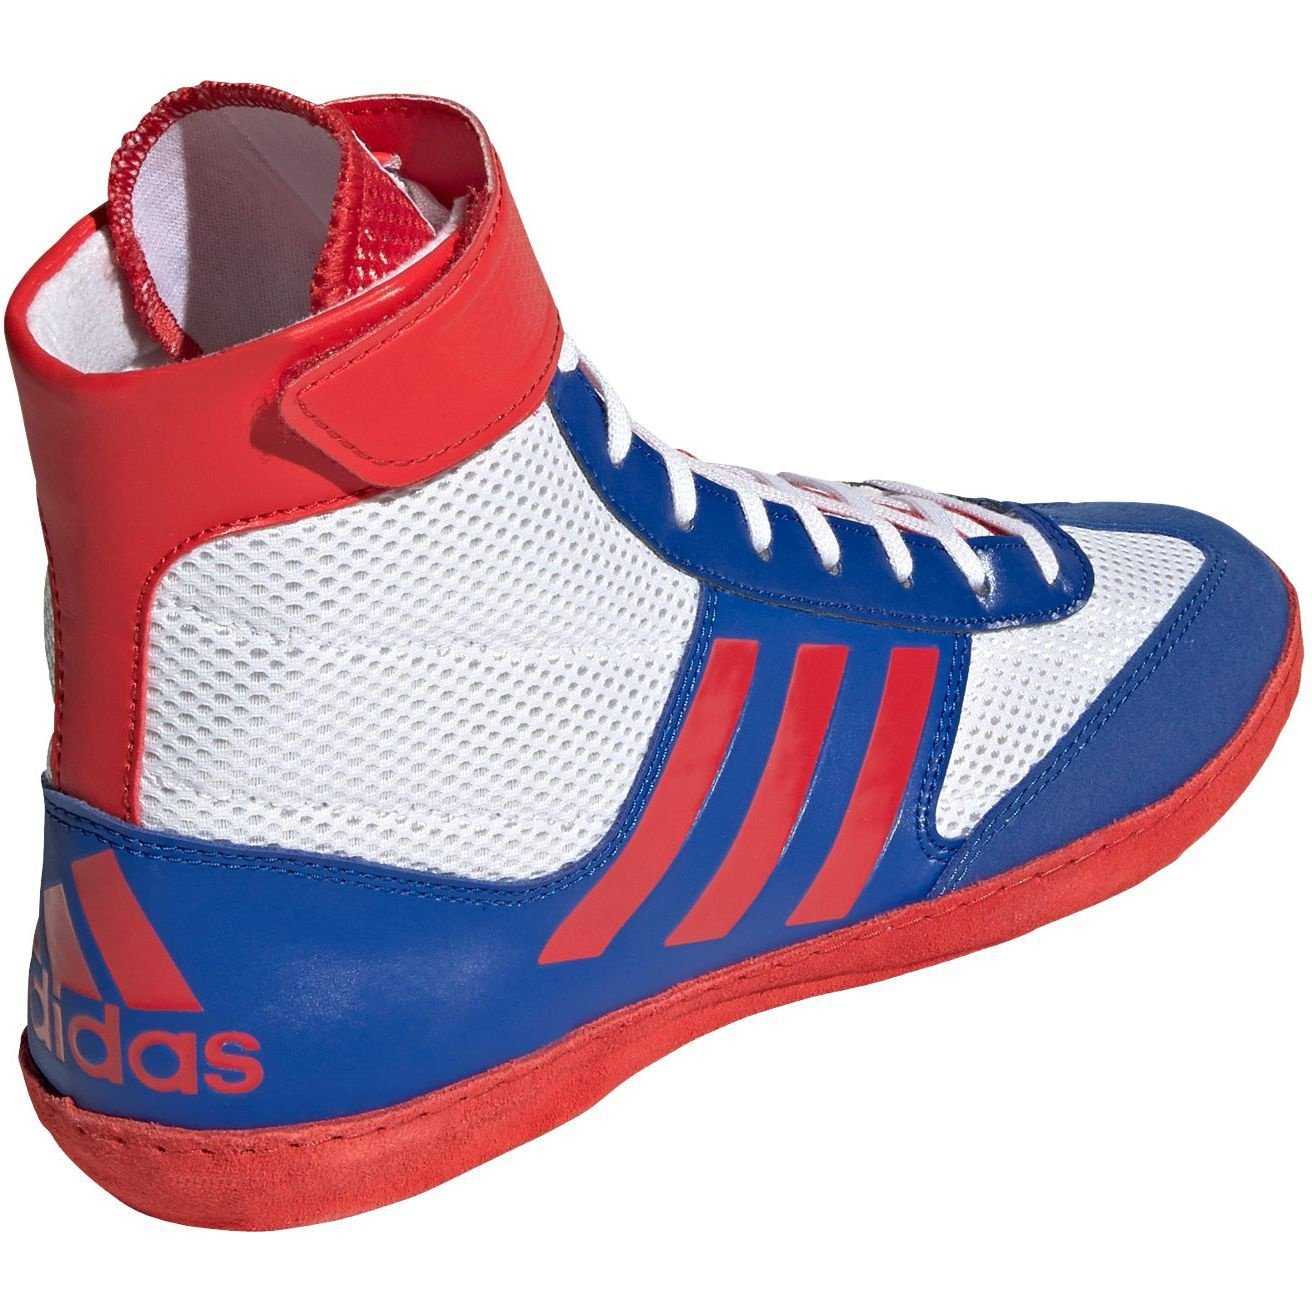 Adidas 224 Combat Speed 5 Wrestling Shoes - White Royal Red